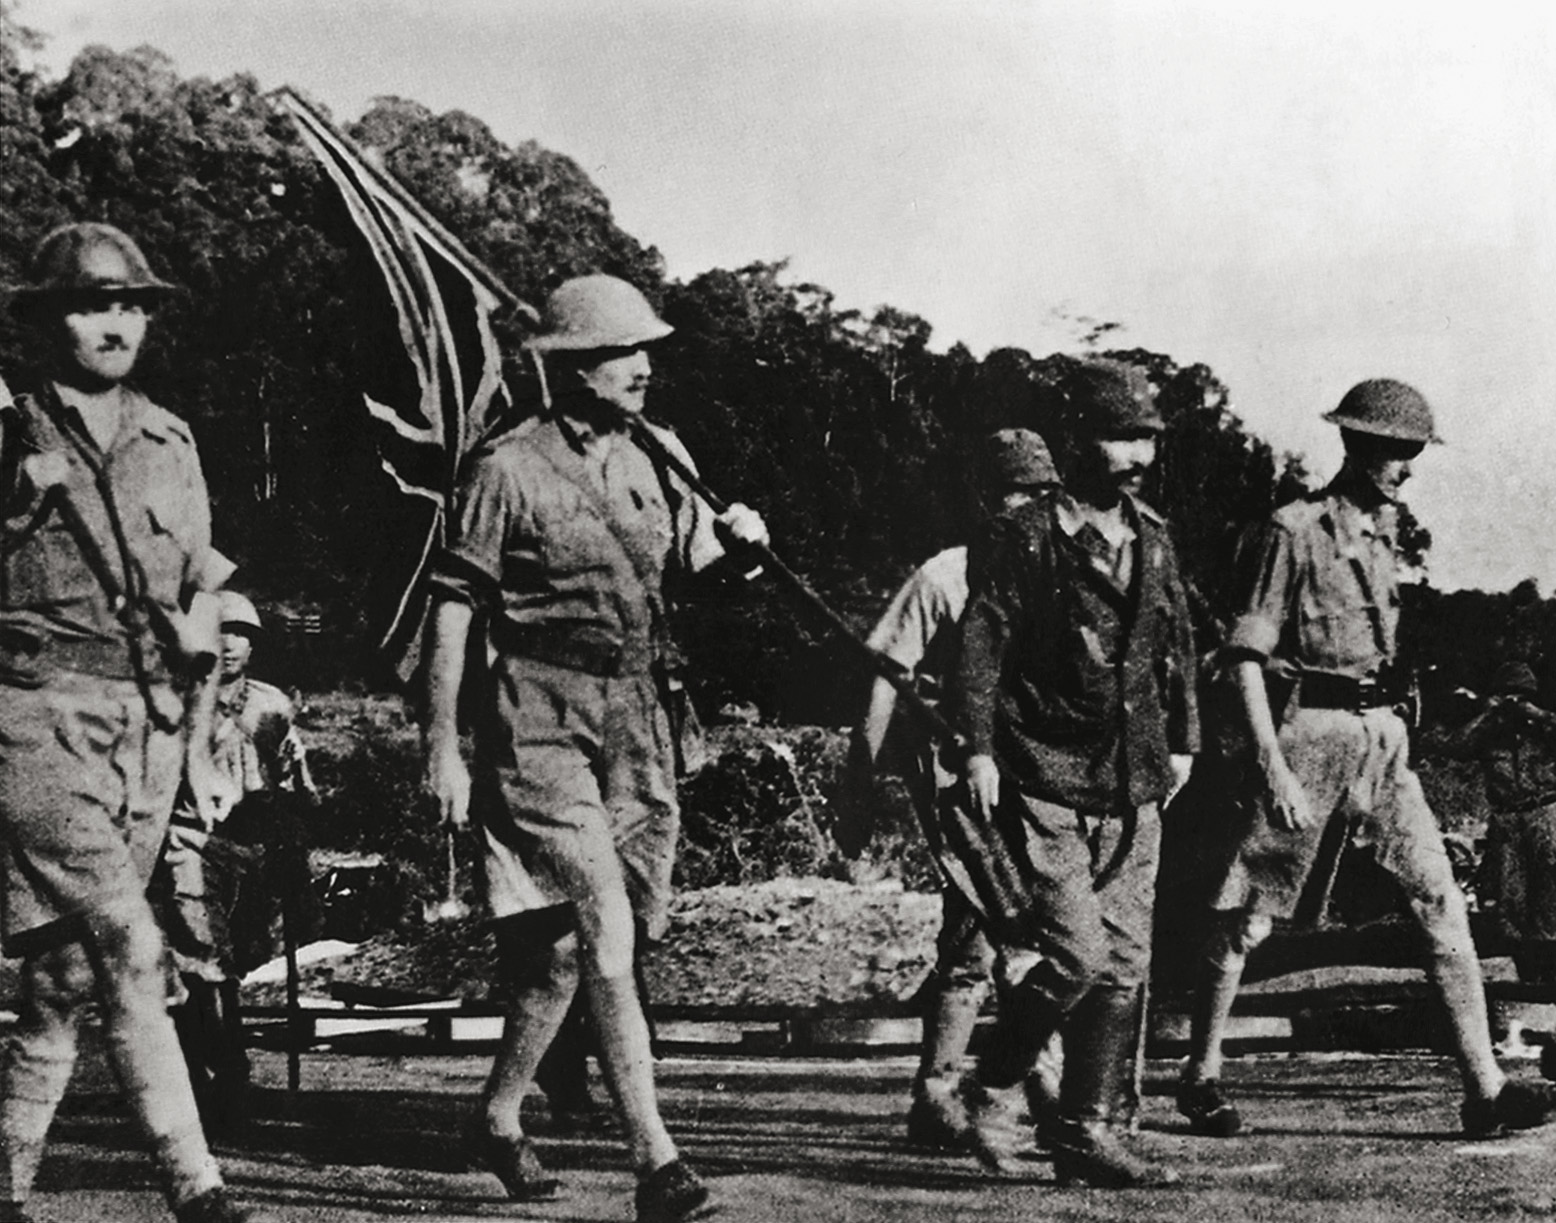 After one of the greatest disasters in British military history, British General Arthur Percival marches begrudgingly towards Japanese lines to surrender his force of 130,000 men in Singapore.